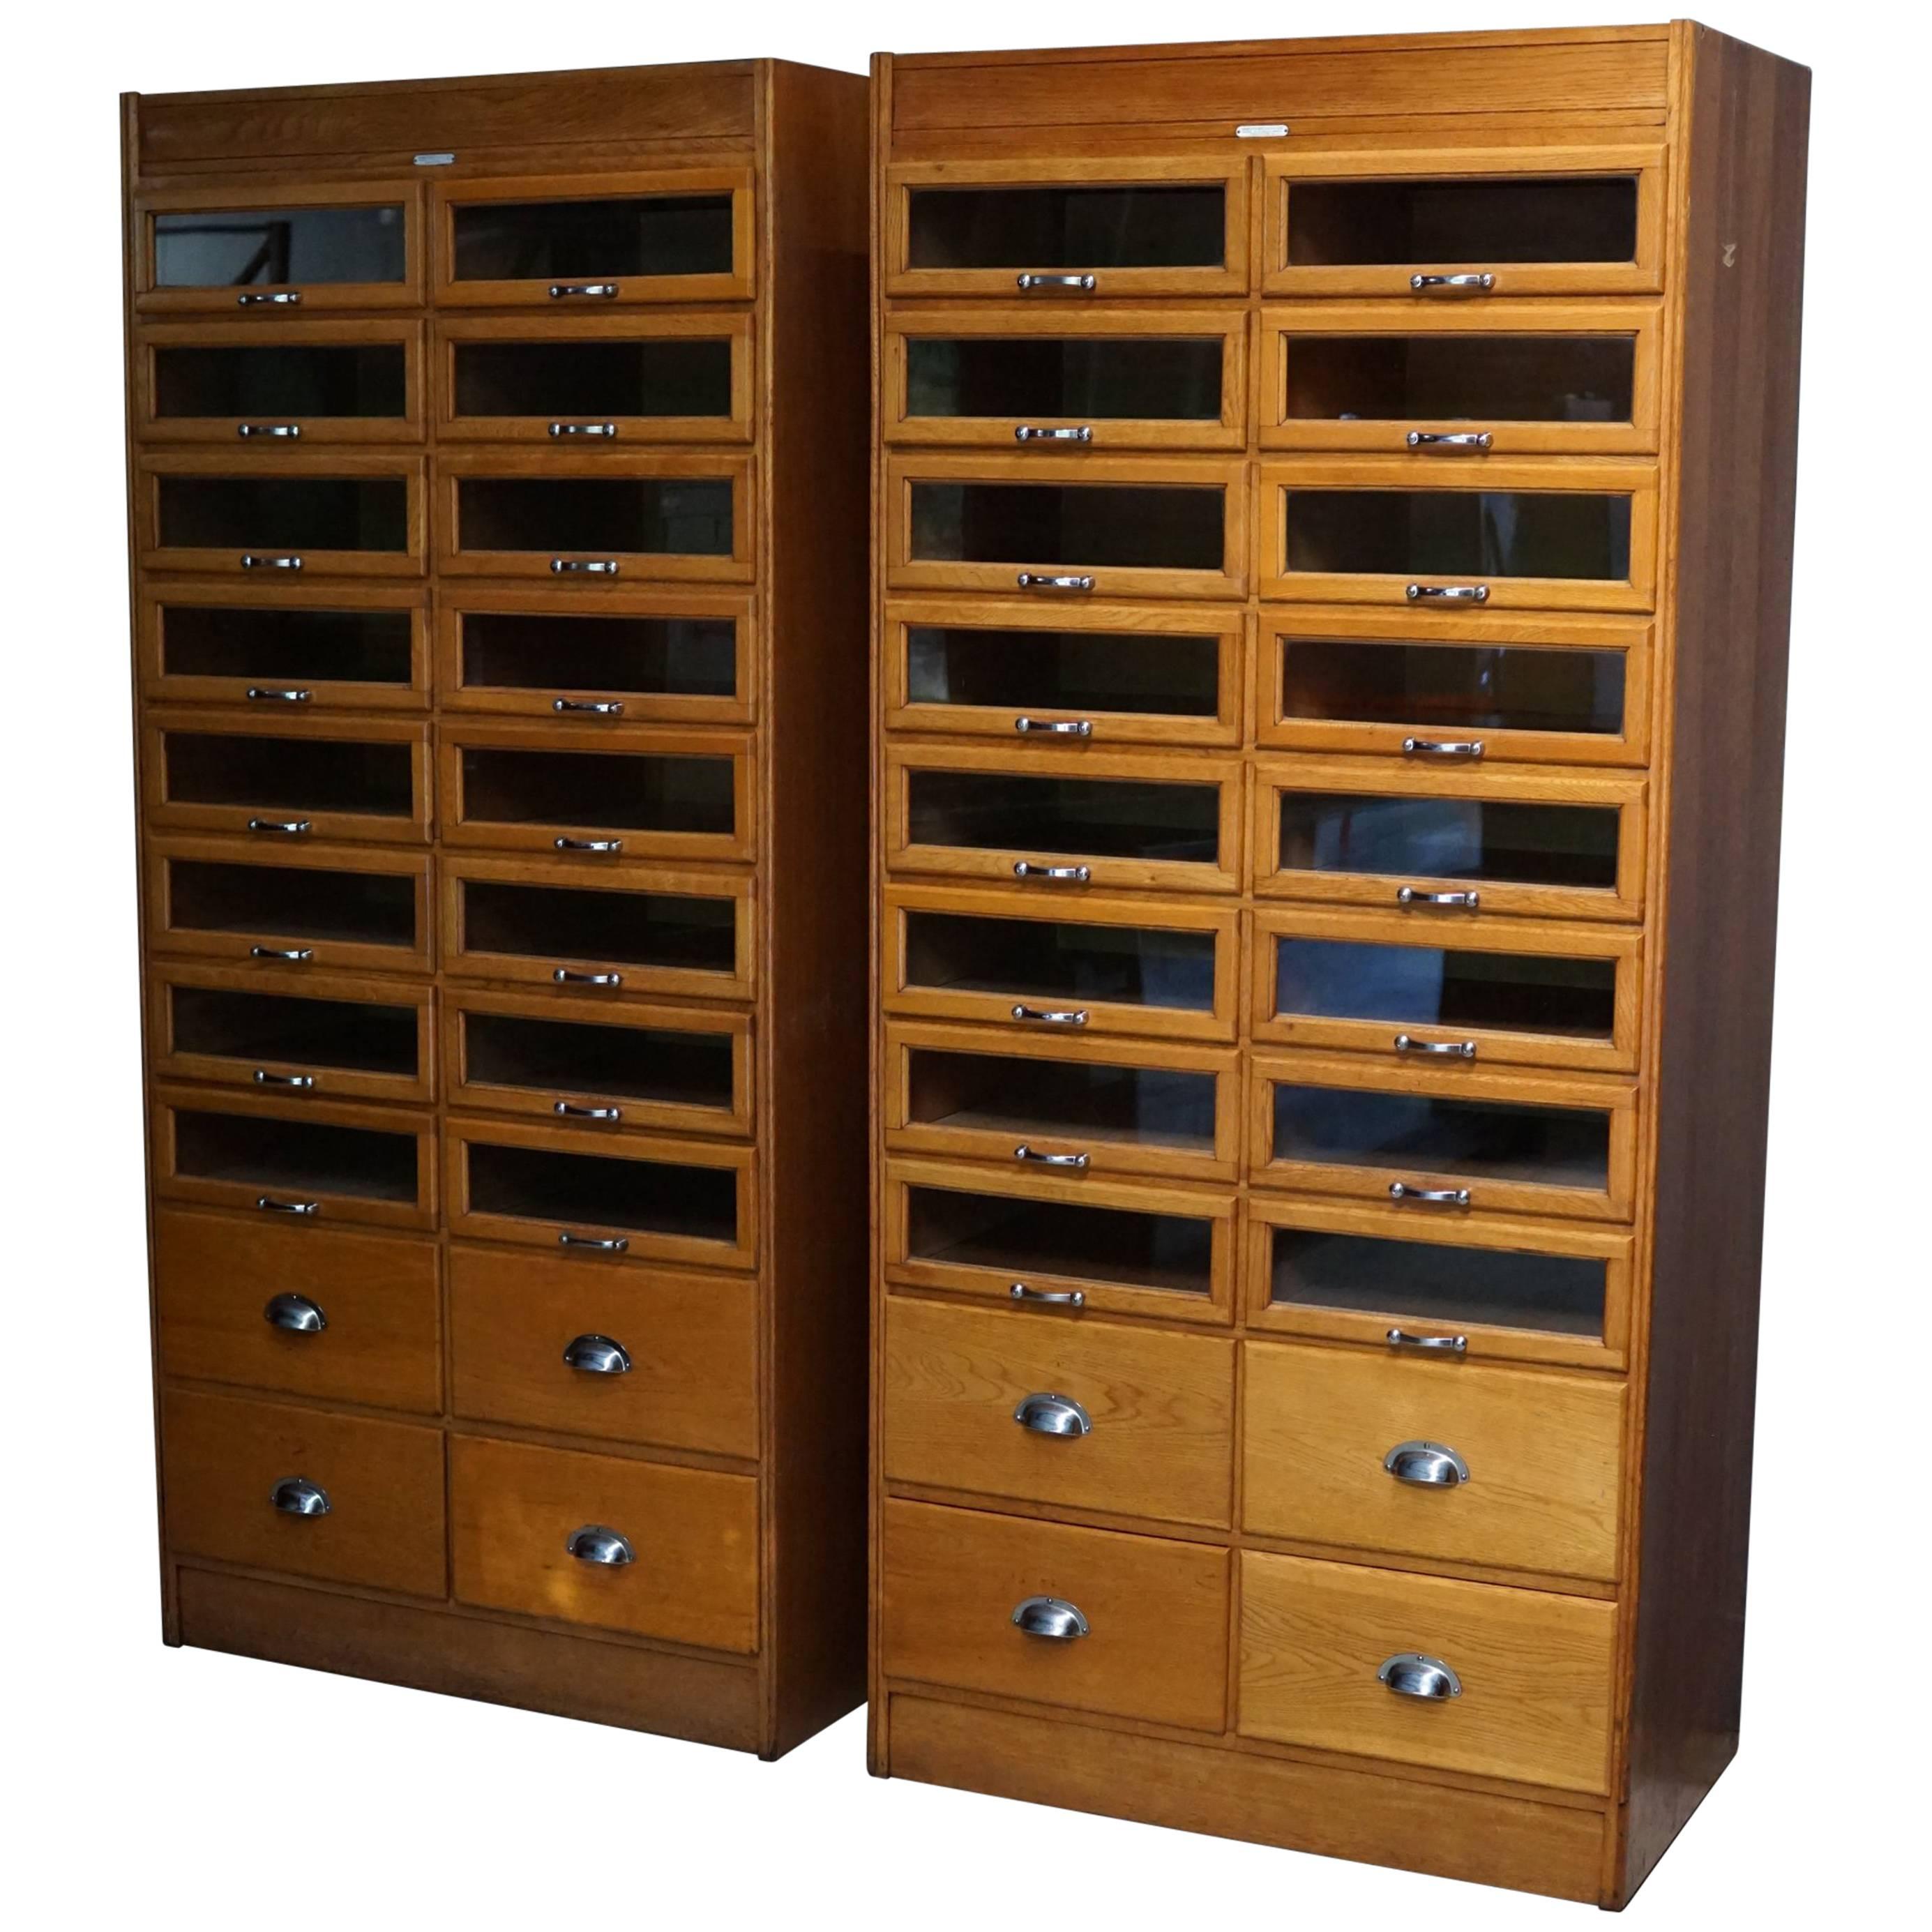 Pair of Oak Haberdashery Shop Cabinets or Retail Units, 1930s